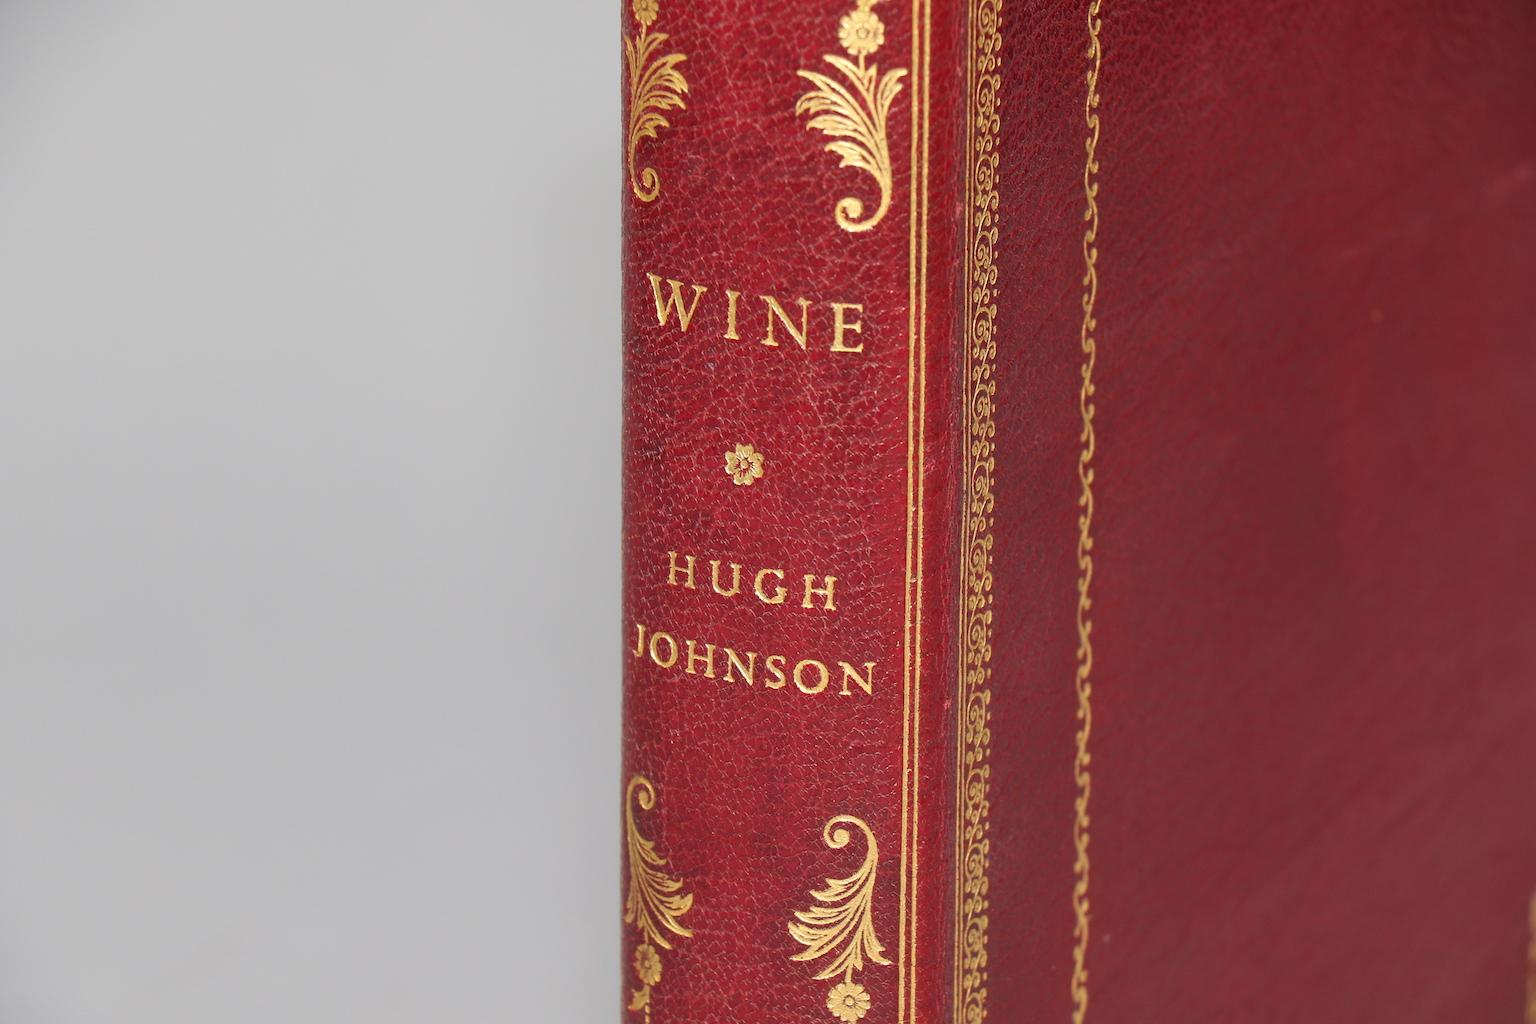 First Edition. Leatherbound. One volume. Quarto. Bound in full wine morocco with all edges gilt and gilt tooling on spine and covers. With line drawings by Owen Wood. Inscribed to Bryan and Naniette by the author. Very good. Published in London by